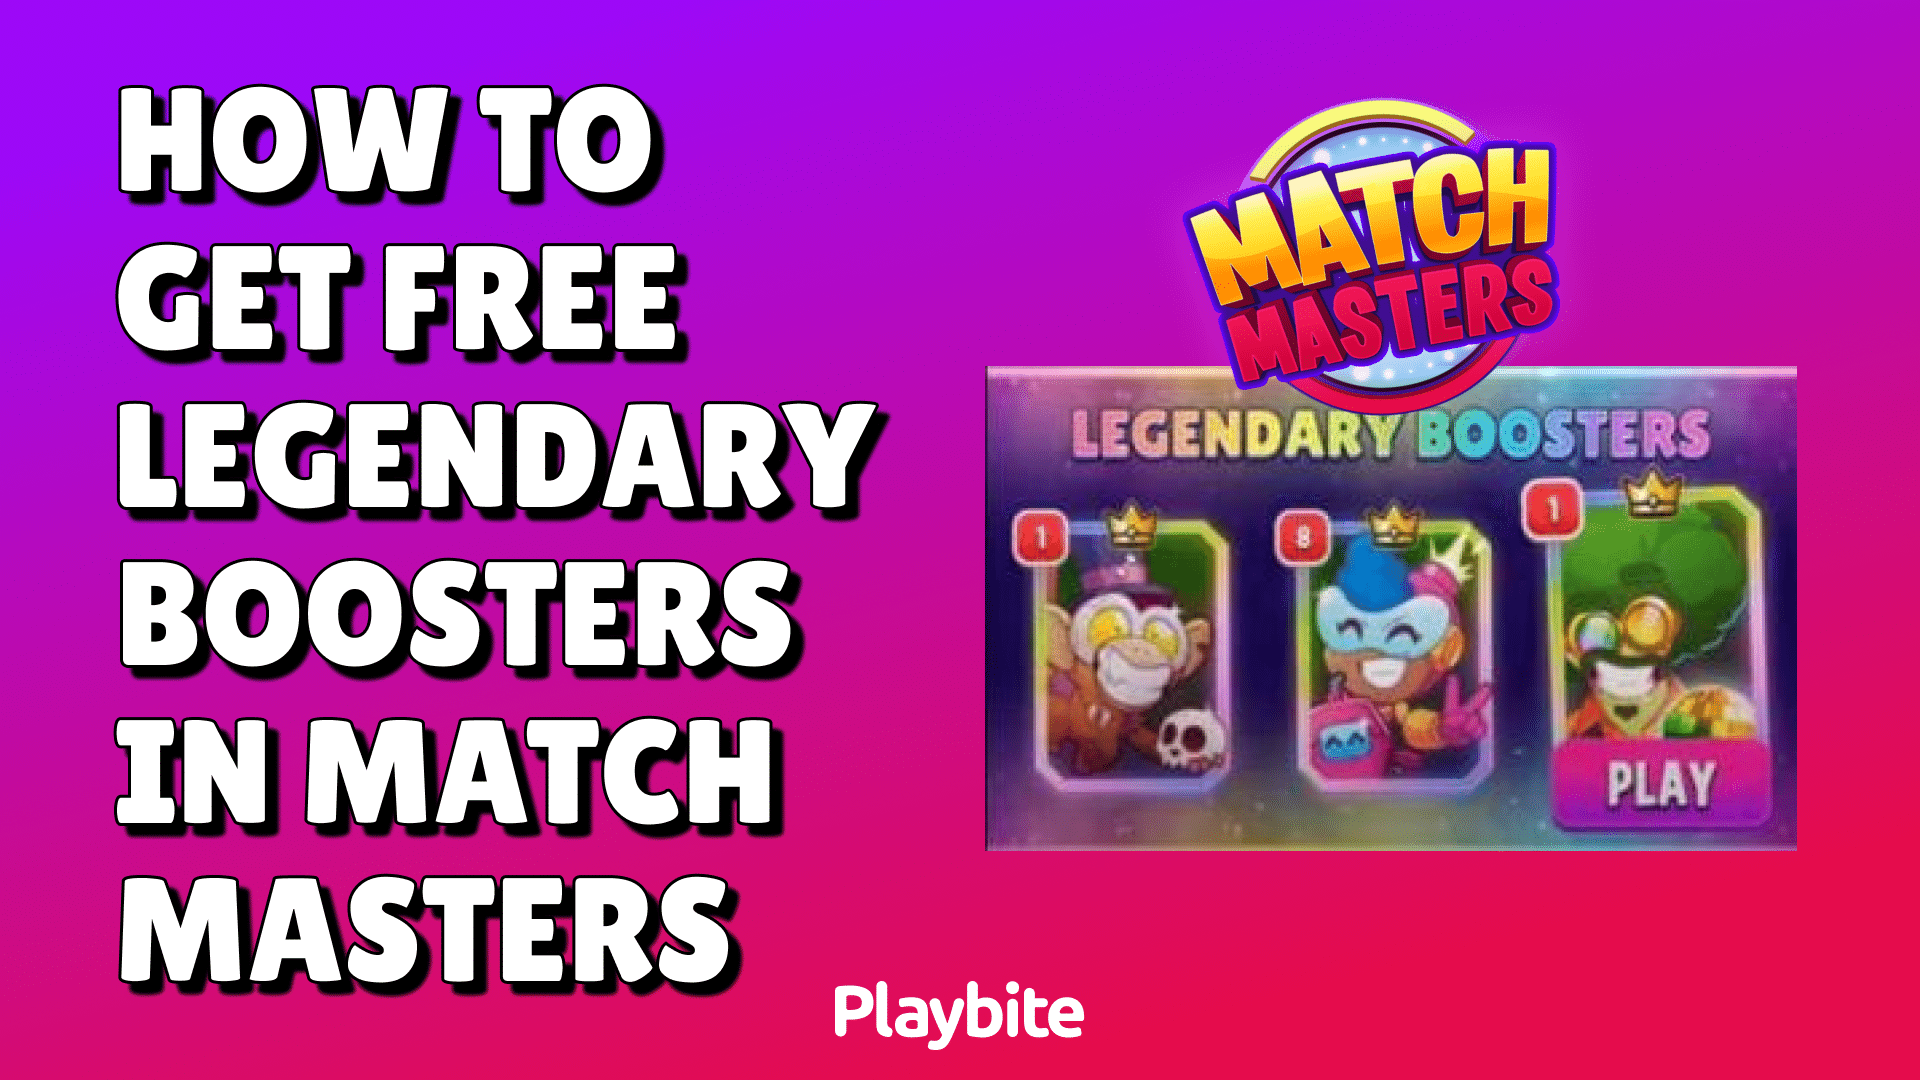 How To Get Free Legendary Boosters In Match Masters